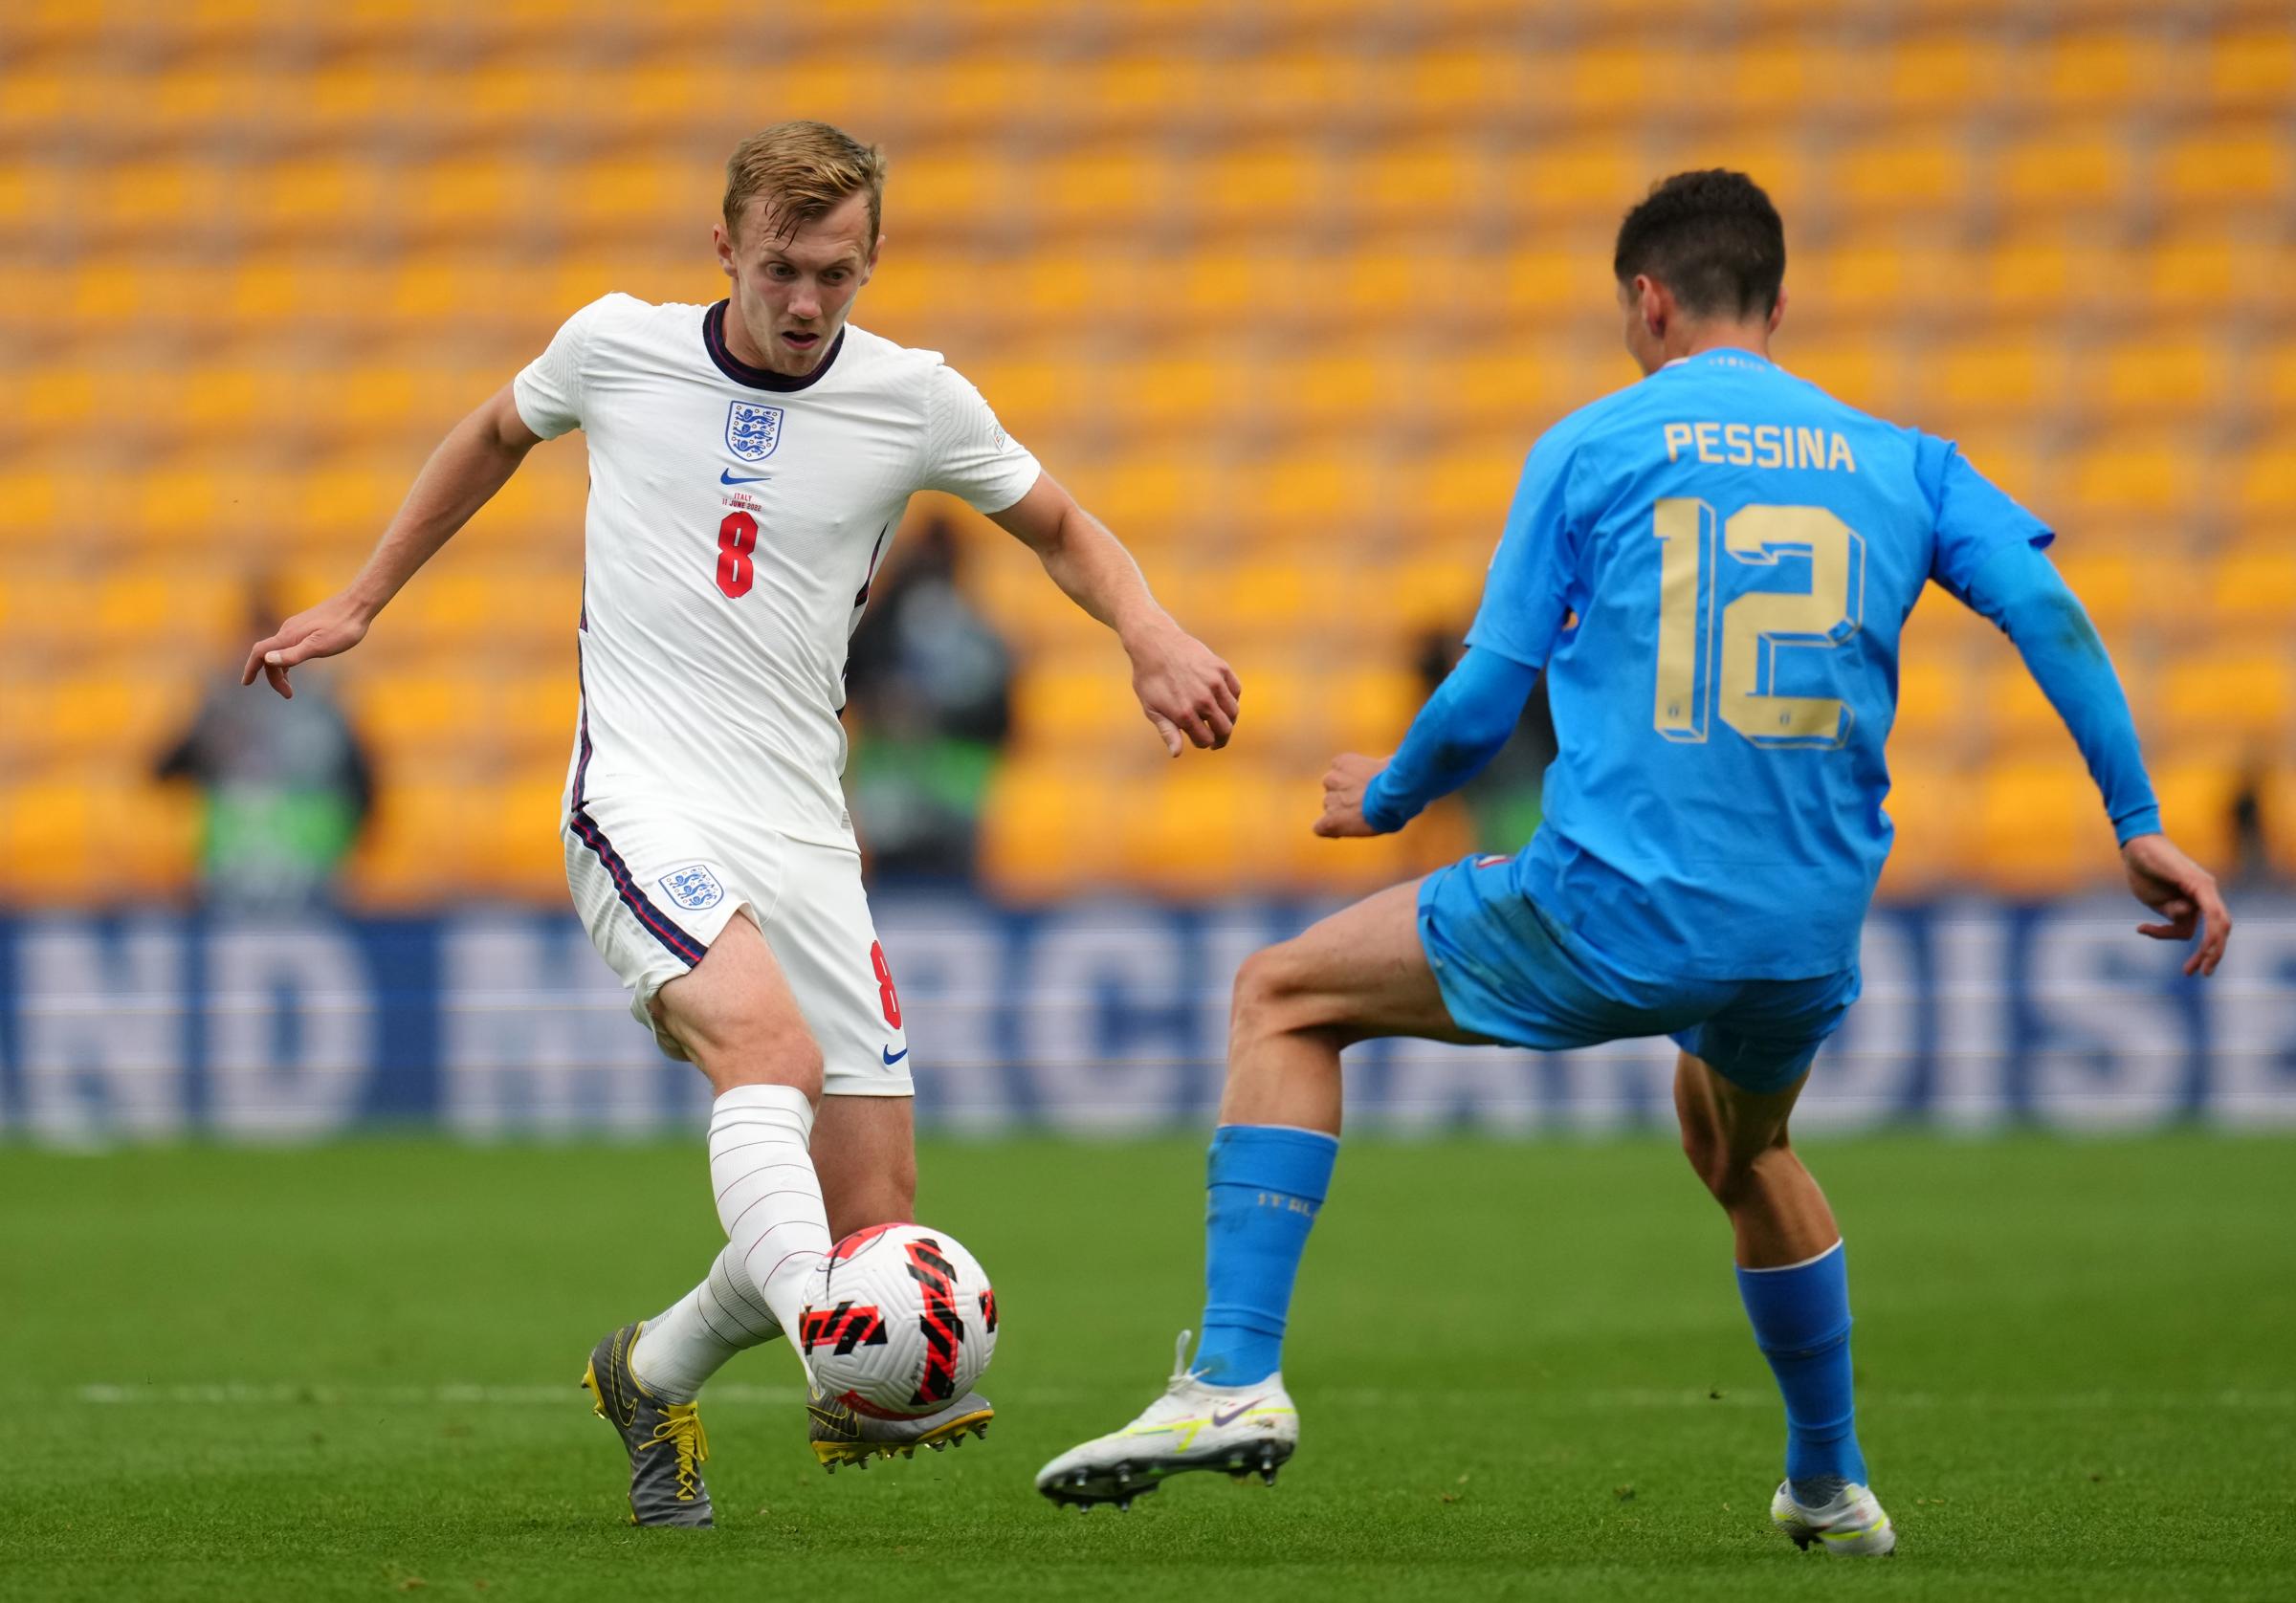 Ward-Prowse completes 90 minutes for England in Italy bore-draw